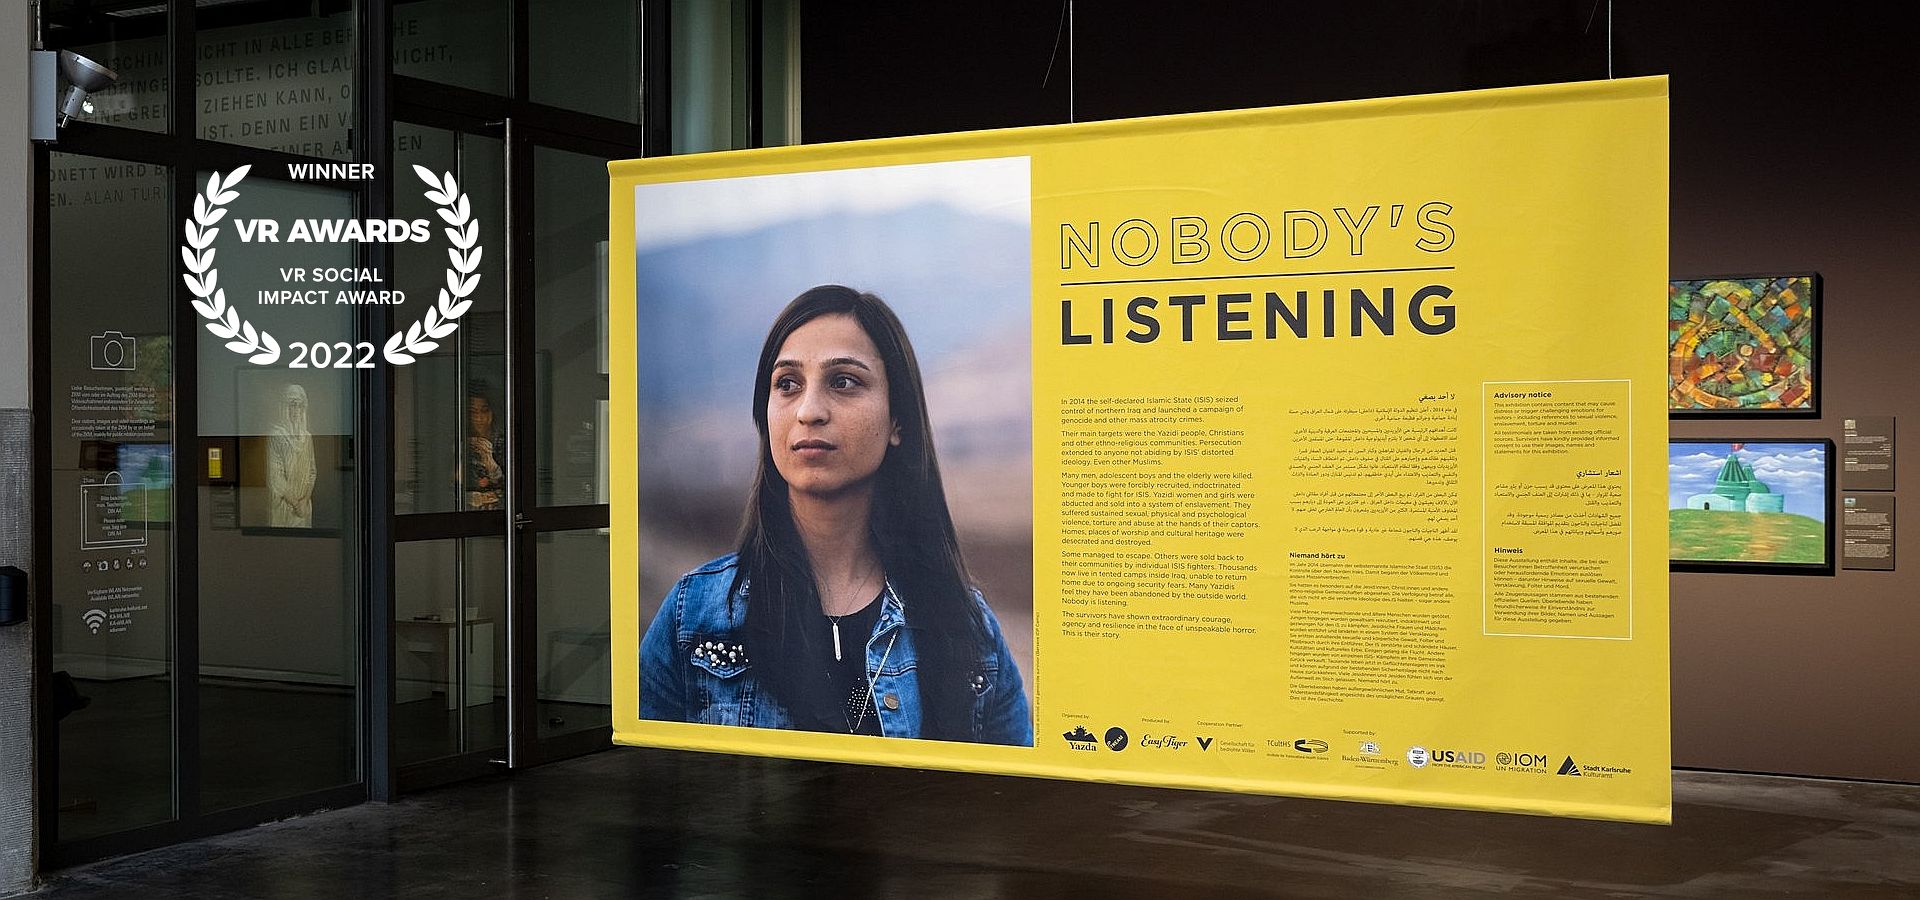 Featured image for “Nobody’s Listening”